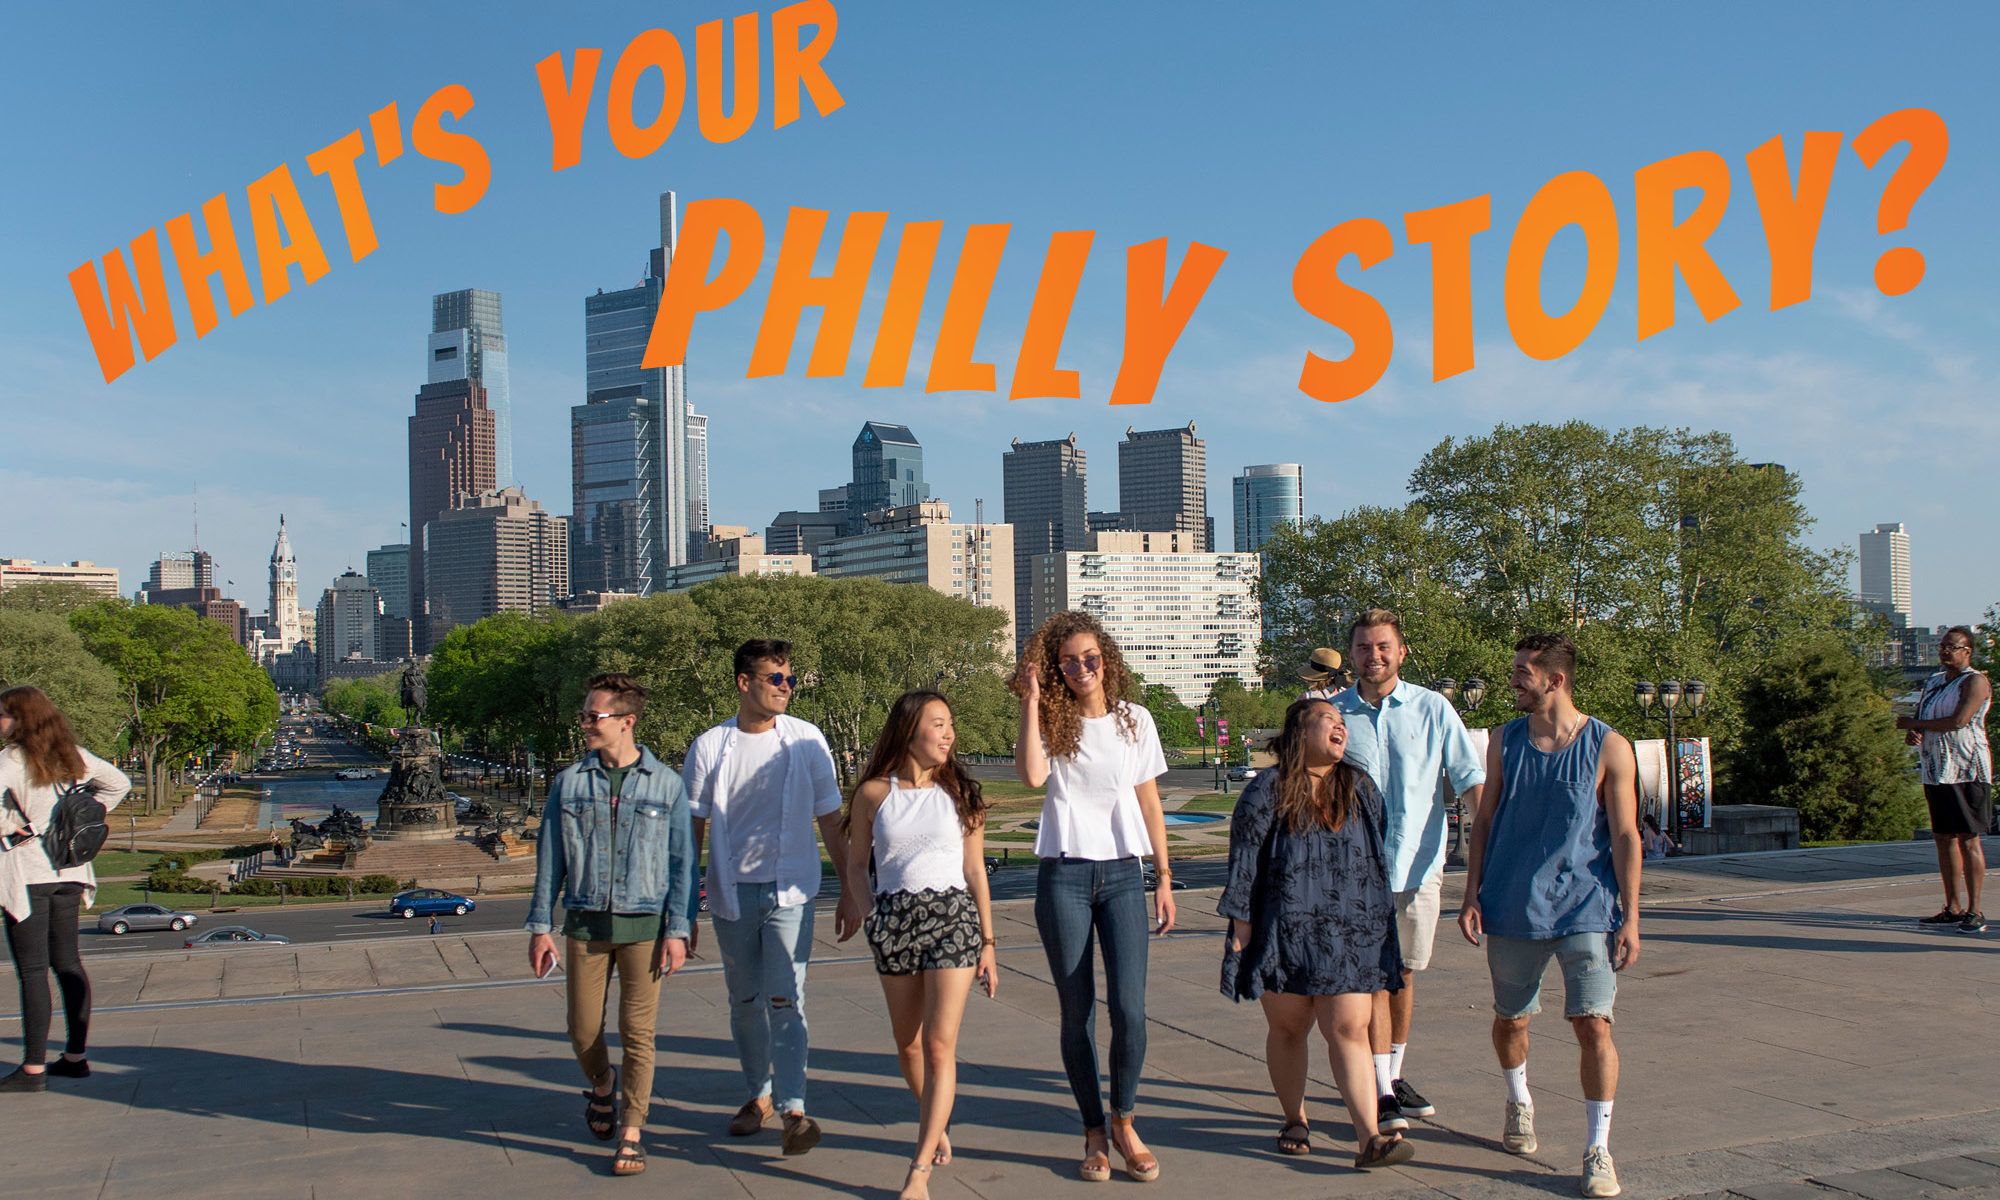 student recruitment strategies - tell your campus story